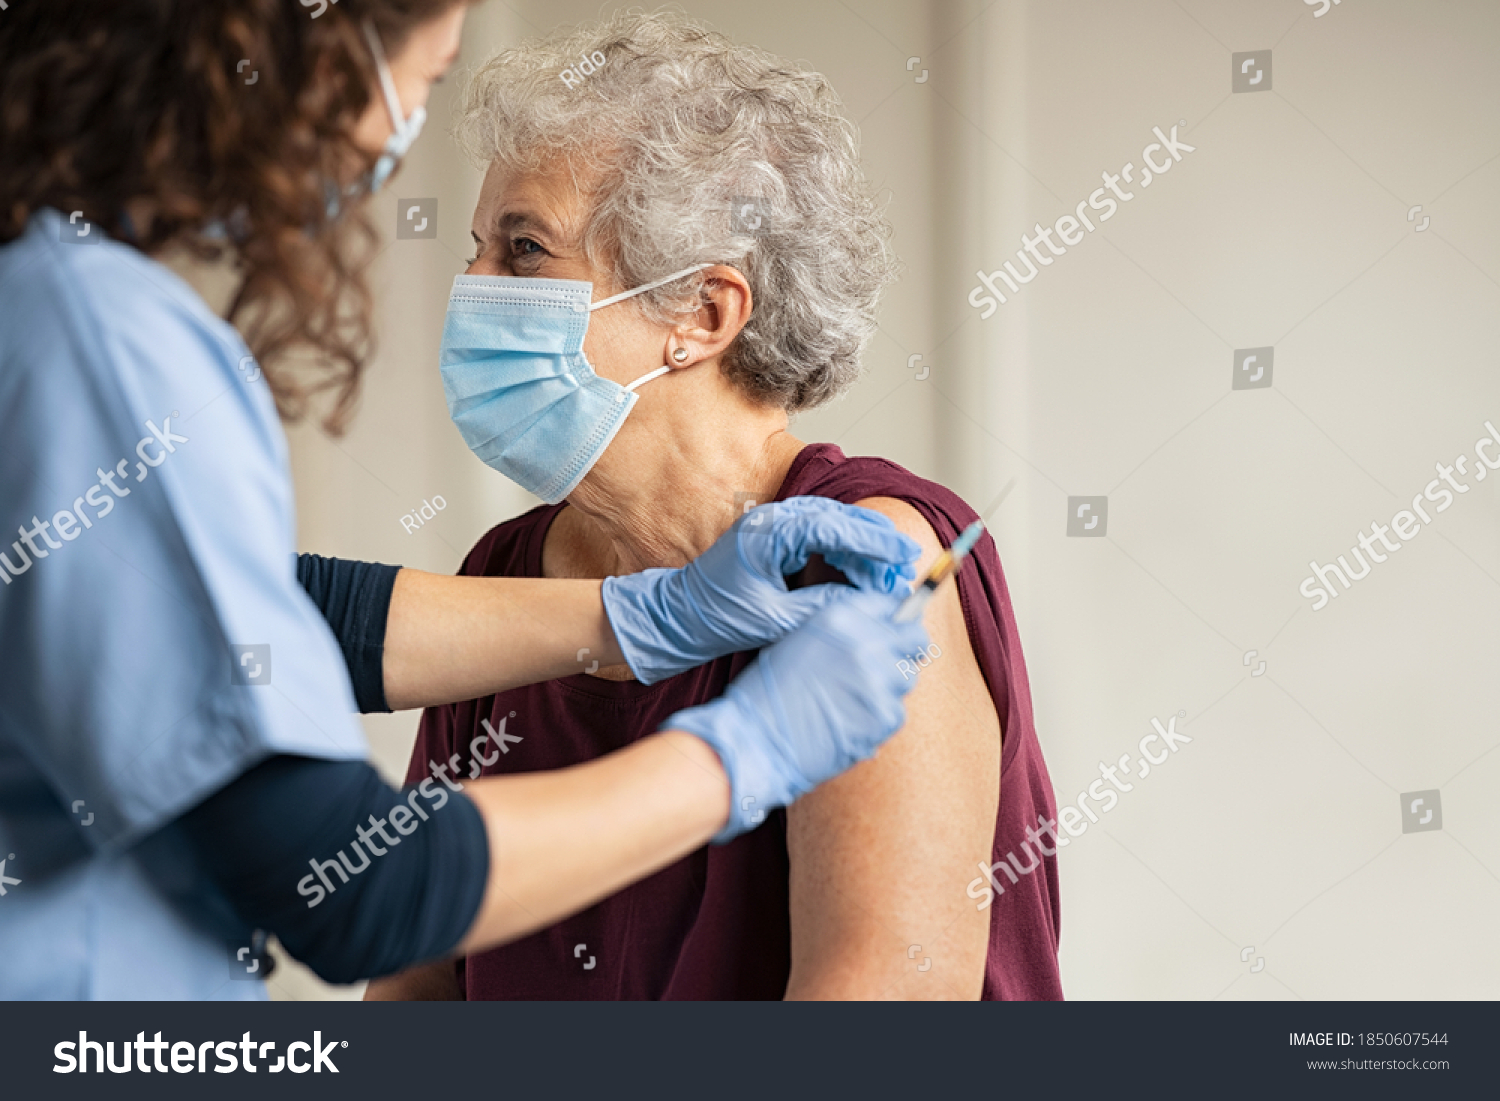 General practitioner vaccinating old patient in clinic with copy space. Doctor giving injection to senior woman at hospital. Nurse holding syringe before make Covid-19 or coronavirus vaccine. #1850607544